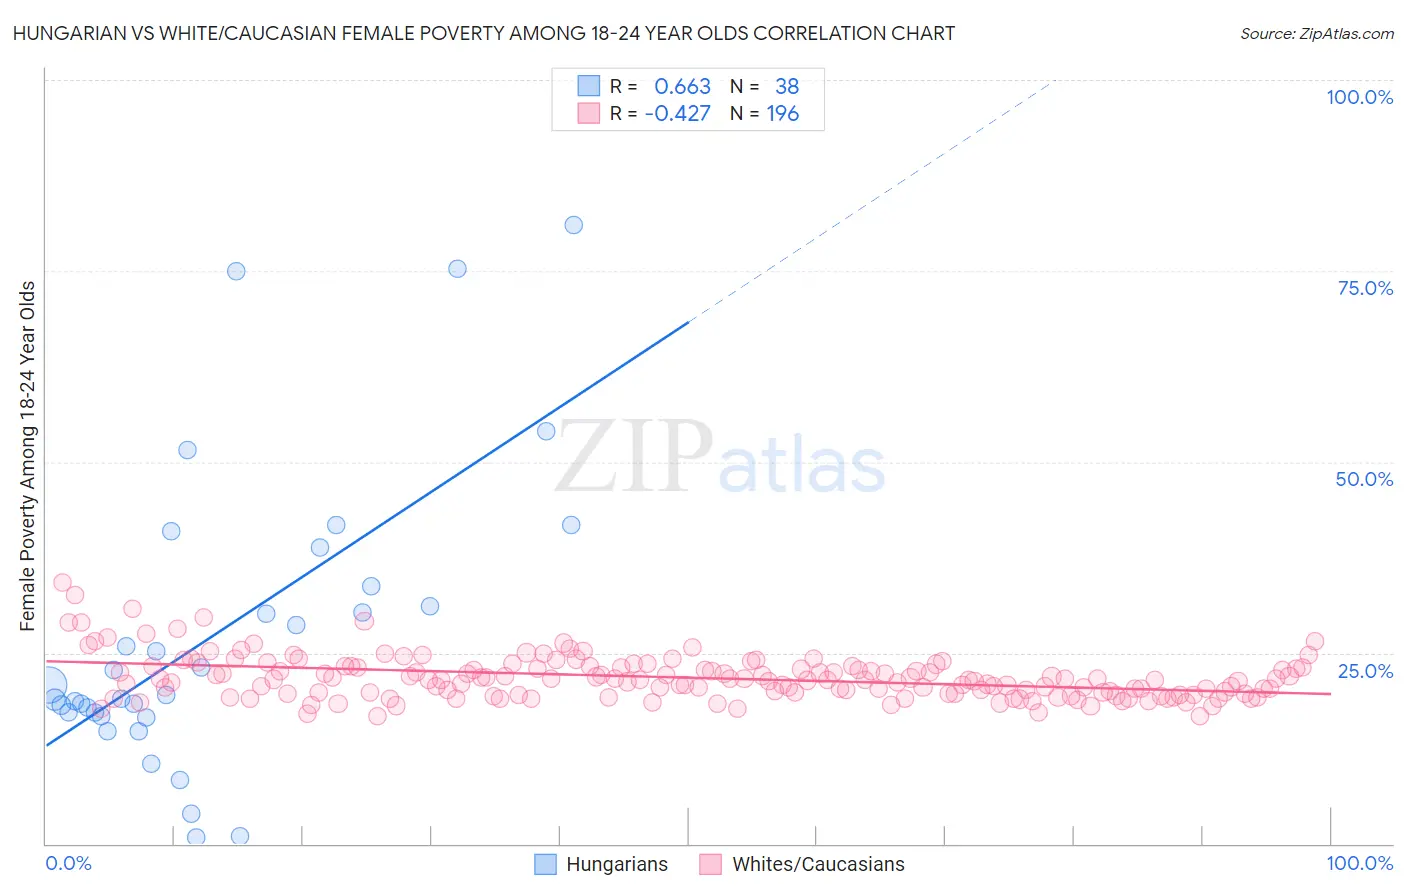 Hungarian vs White/Caucasian Female Poverty Among 18-24 Year Olds